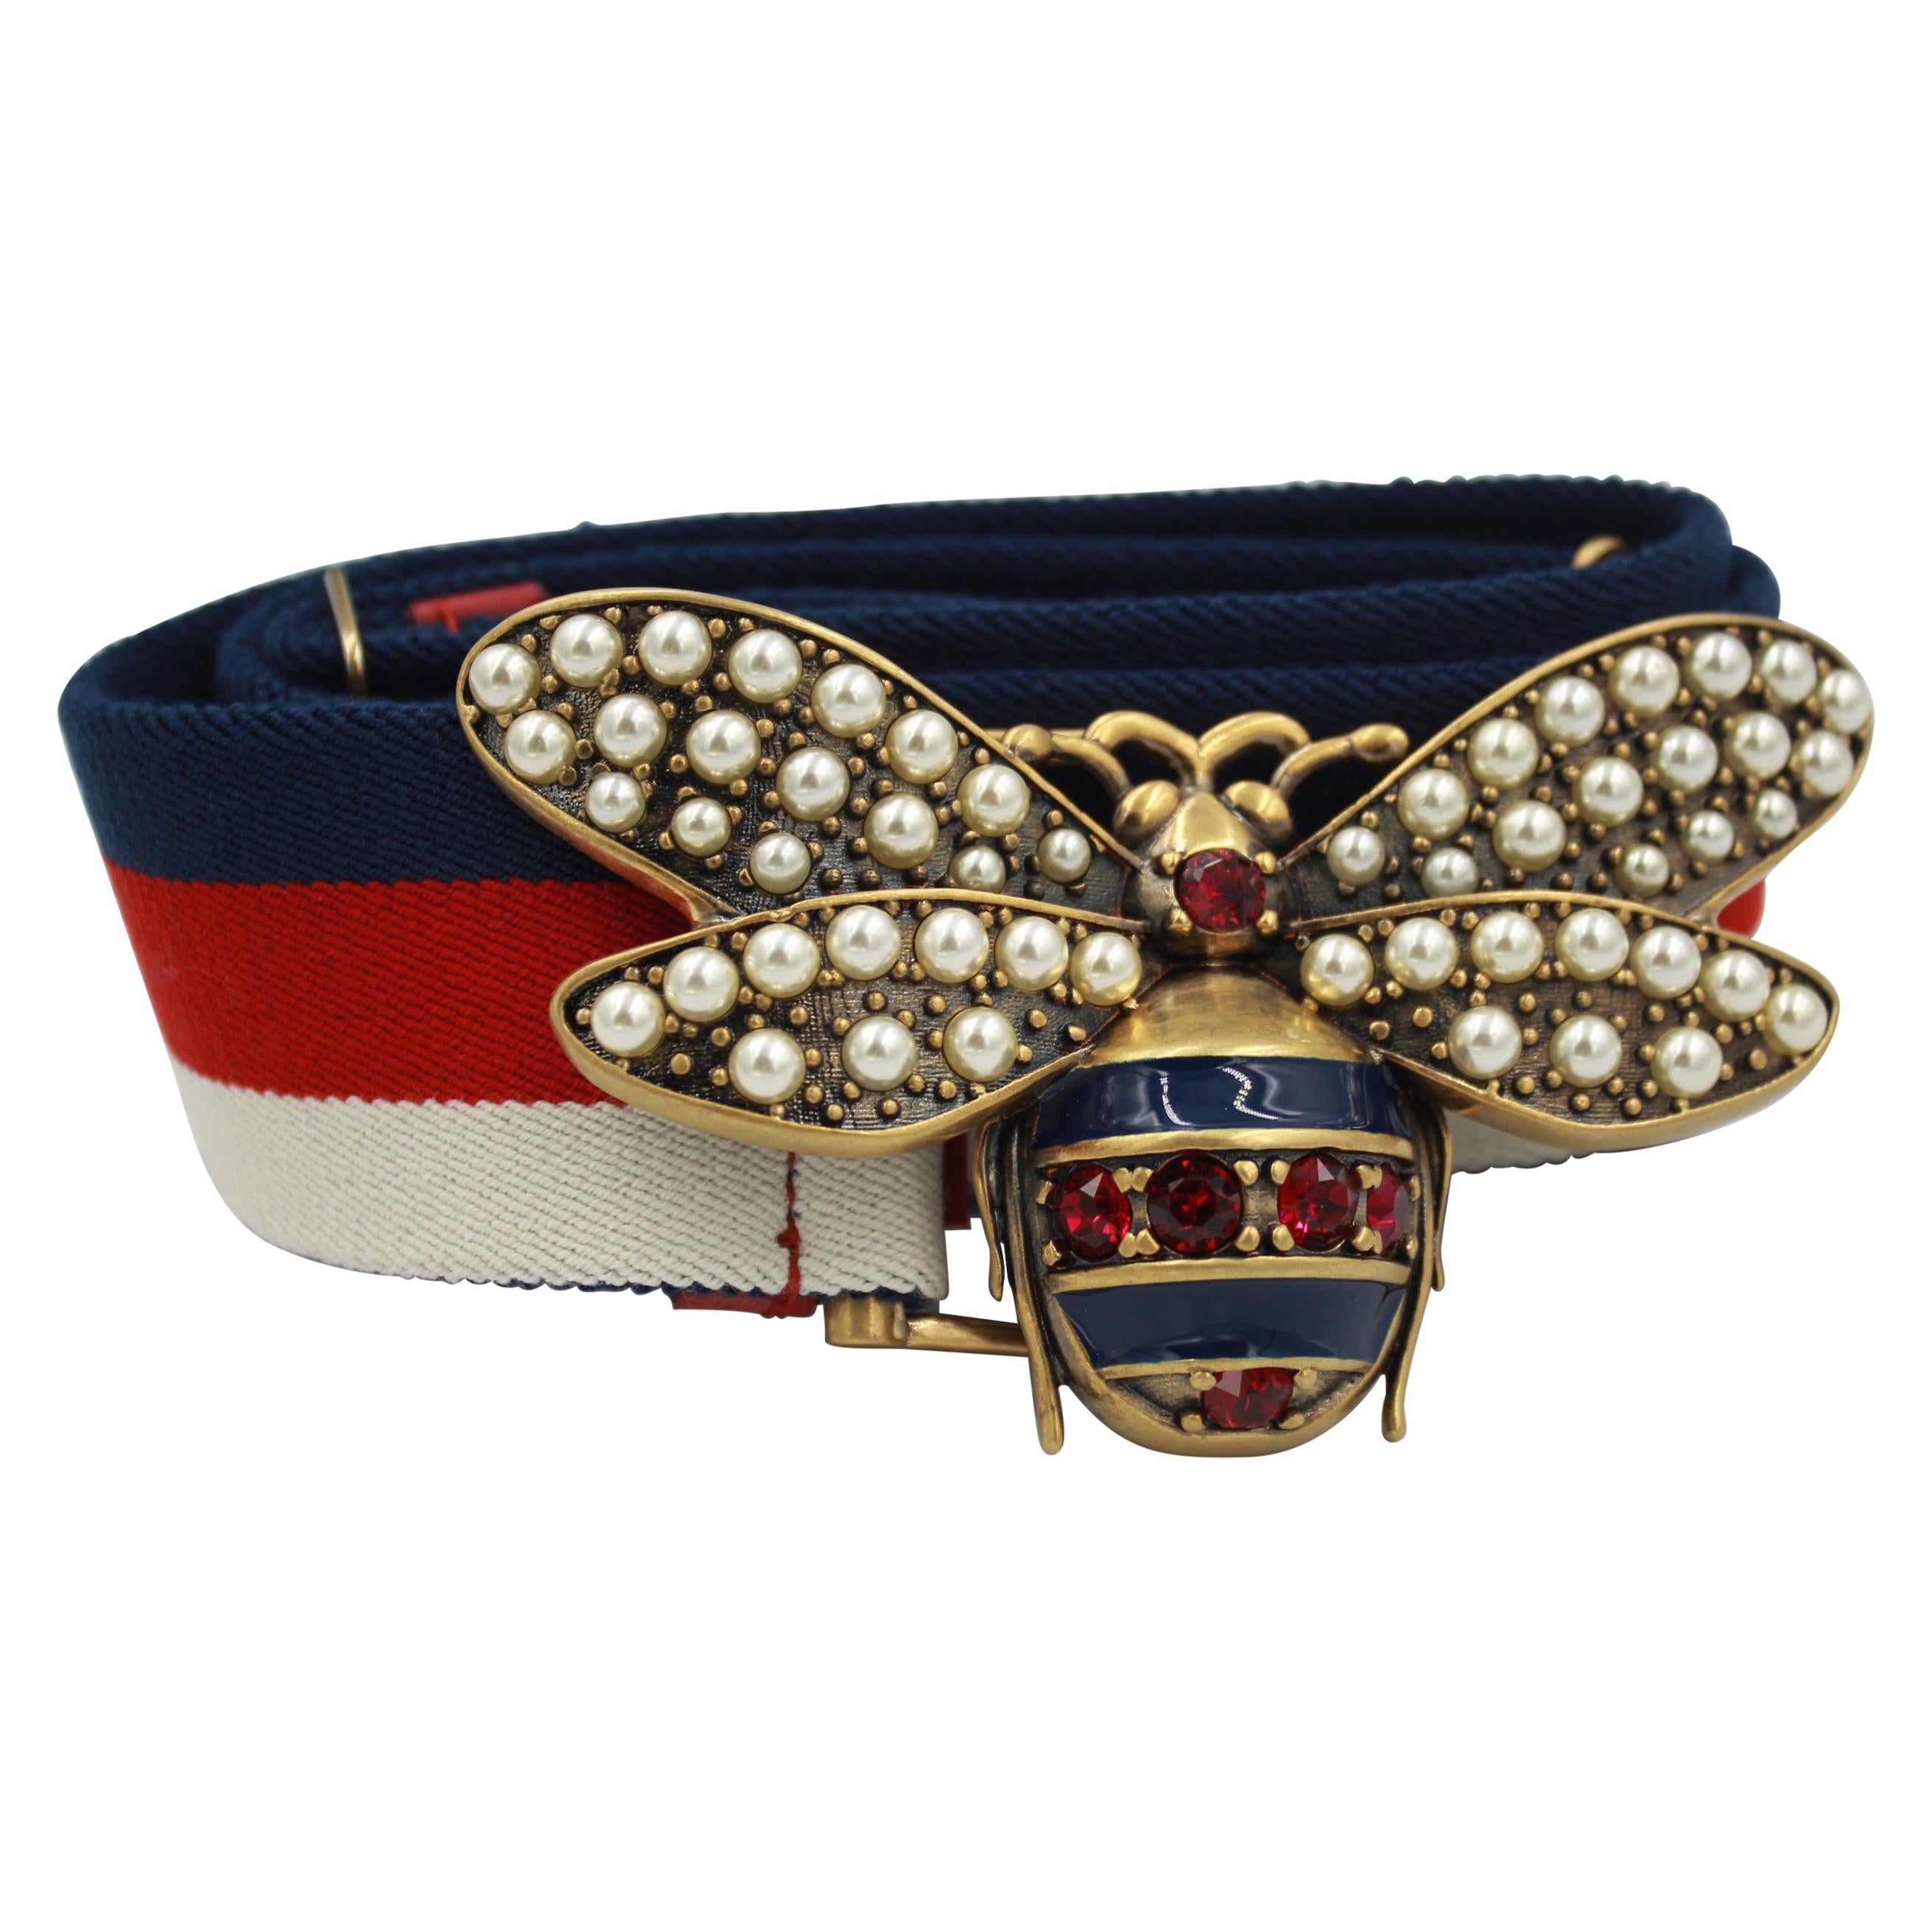 Gucci canvas Belt with the bee buckle made of stone and fake pearls.